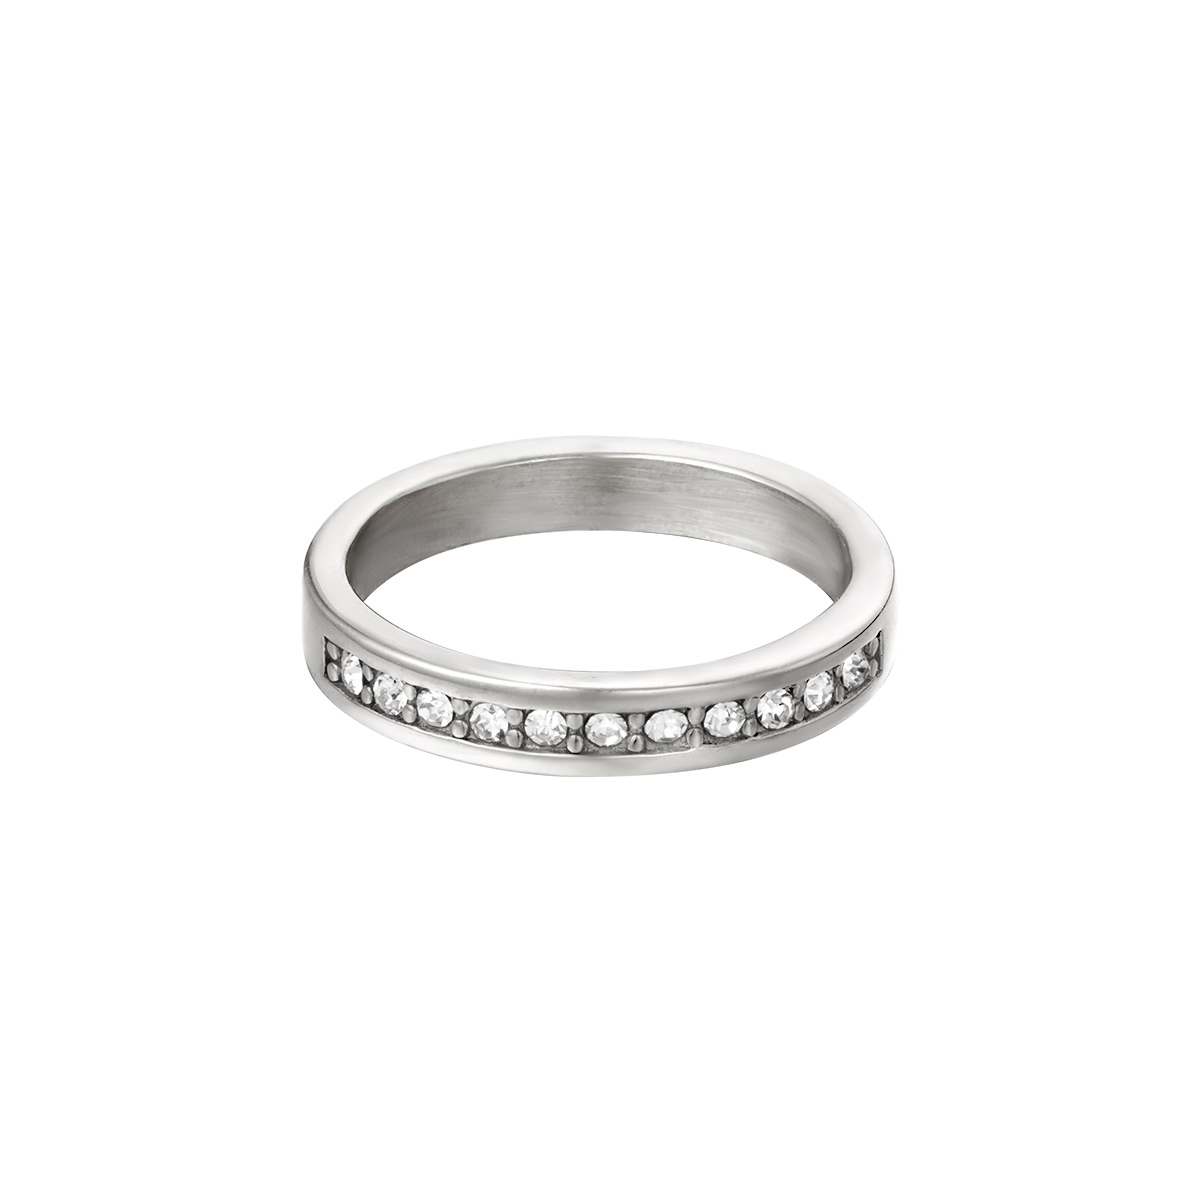 Stainless steel ring with zircon stones